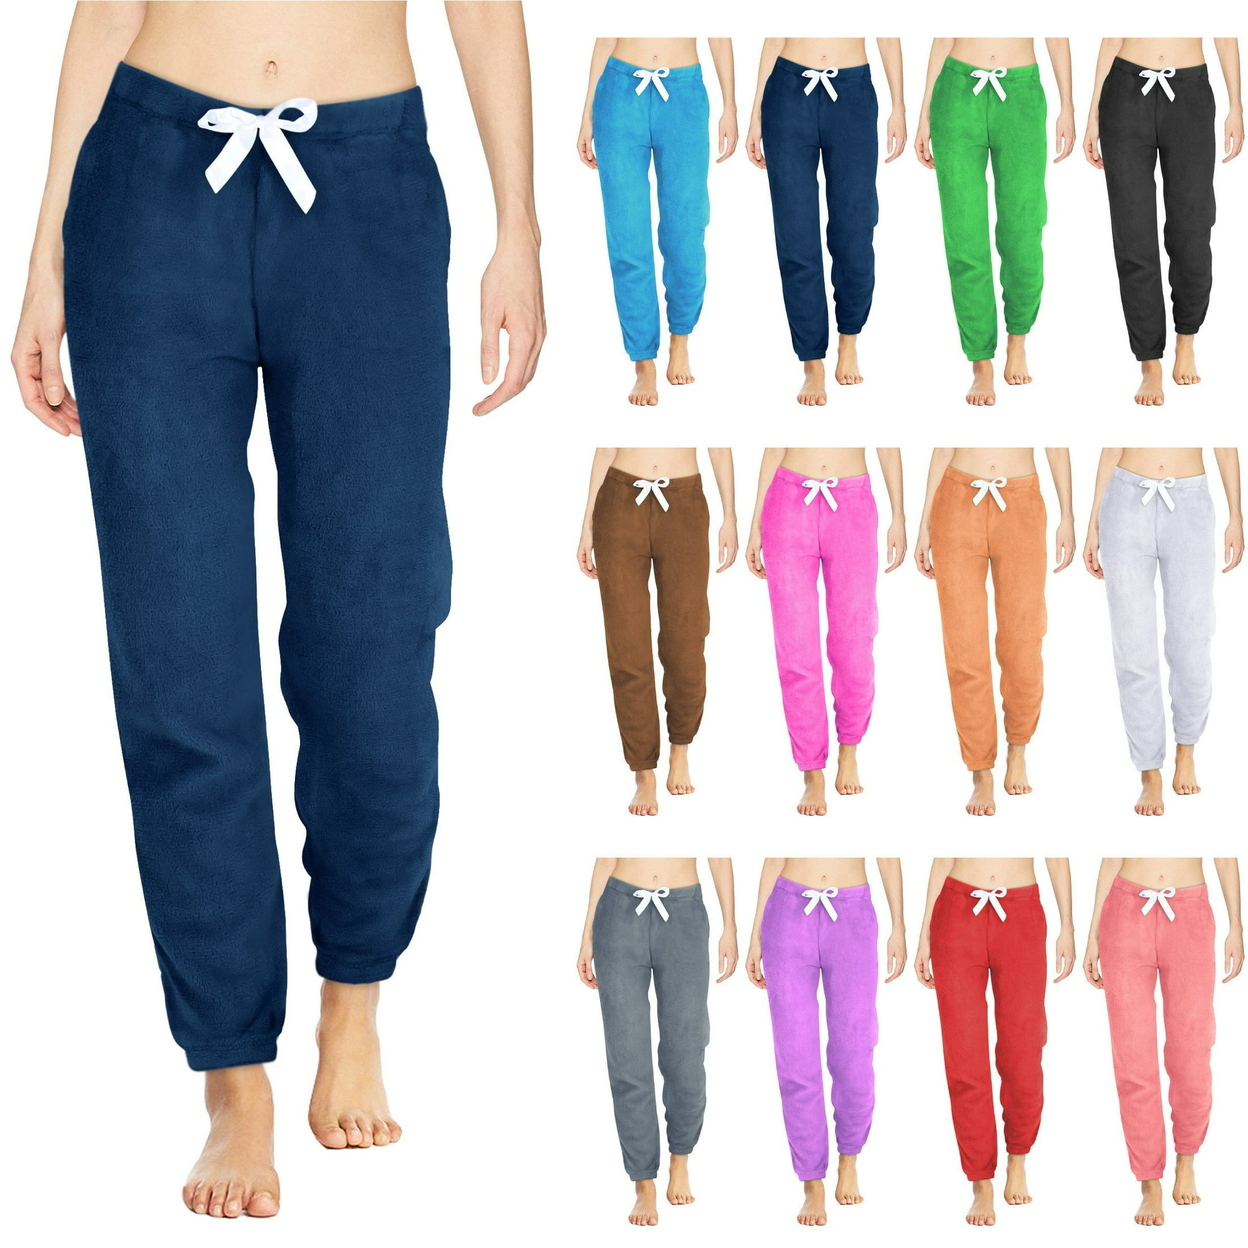 Multi-Pack: Women's Solid & Printed Ultra-Soft Comfy Stretch Micro-Fleece Pajama Lounge Pants - 1-pack, Medium, Solid